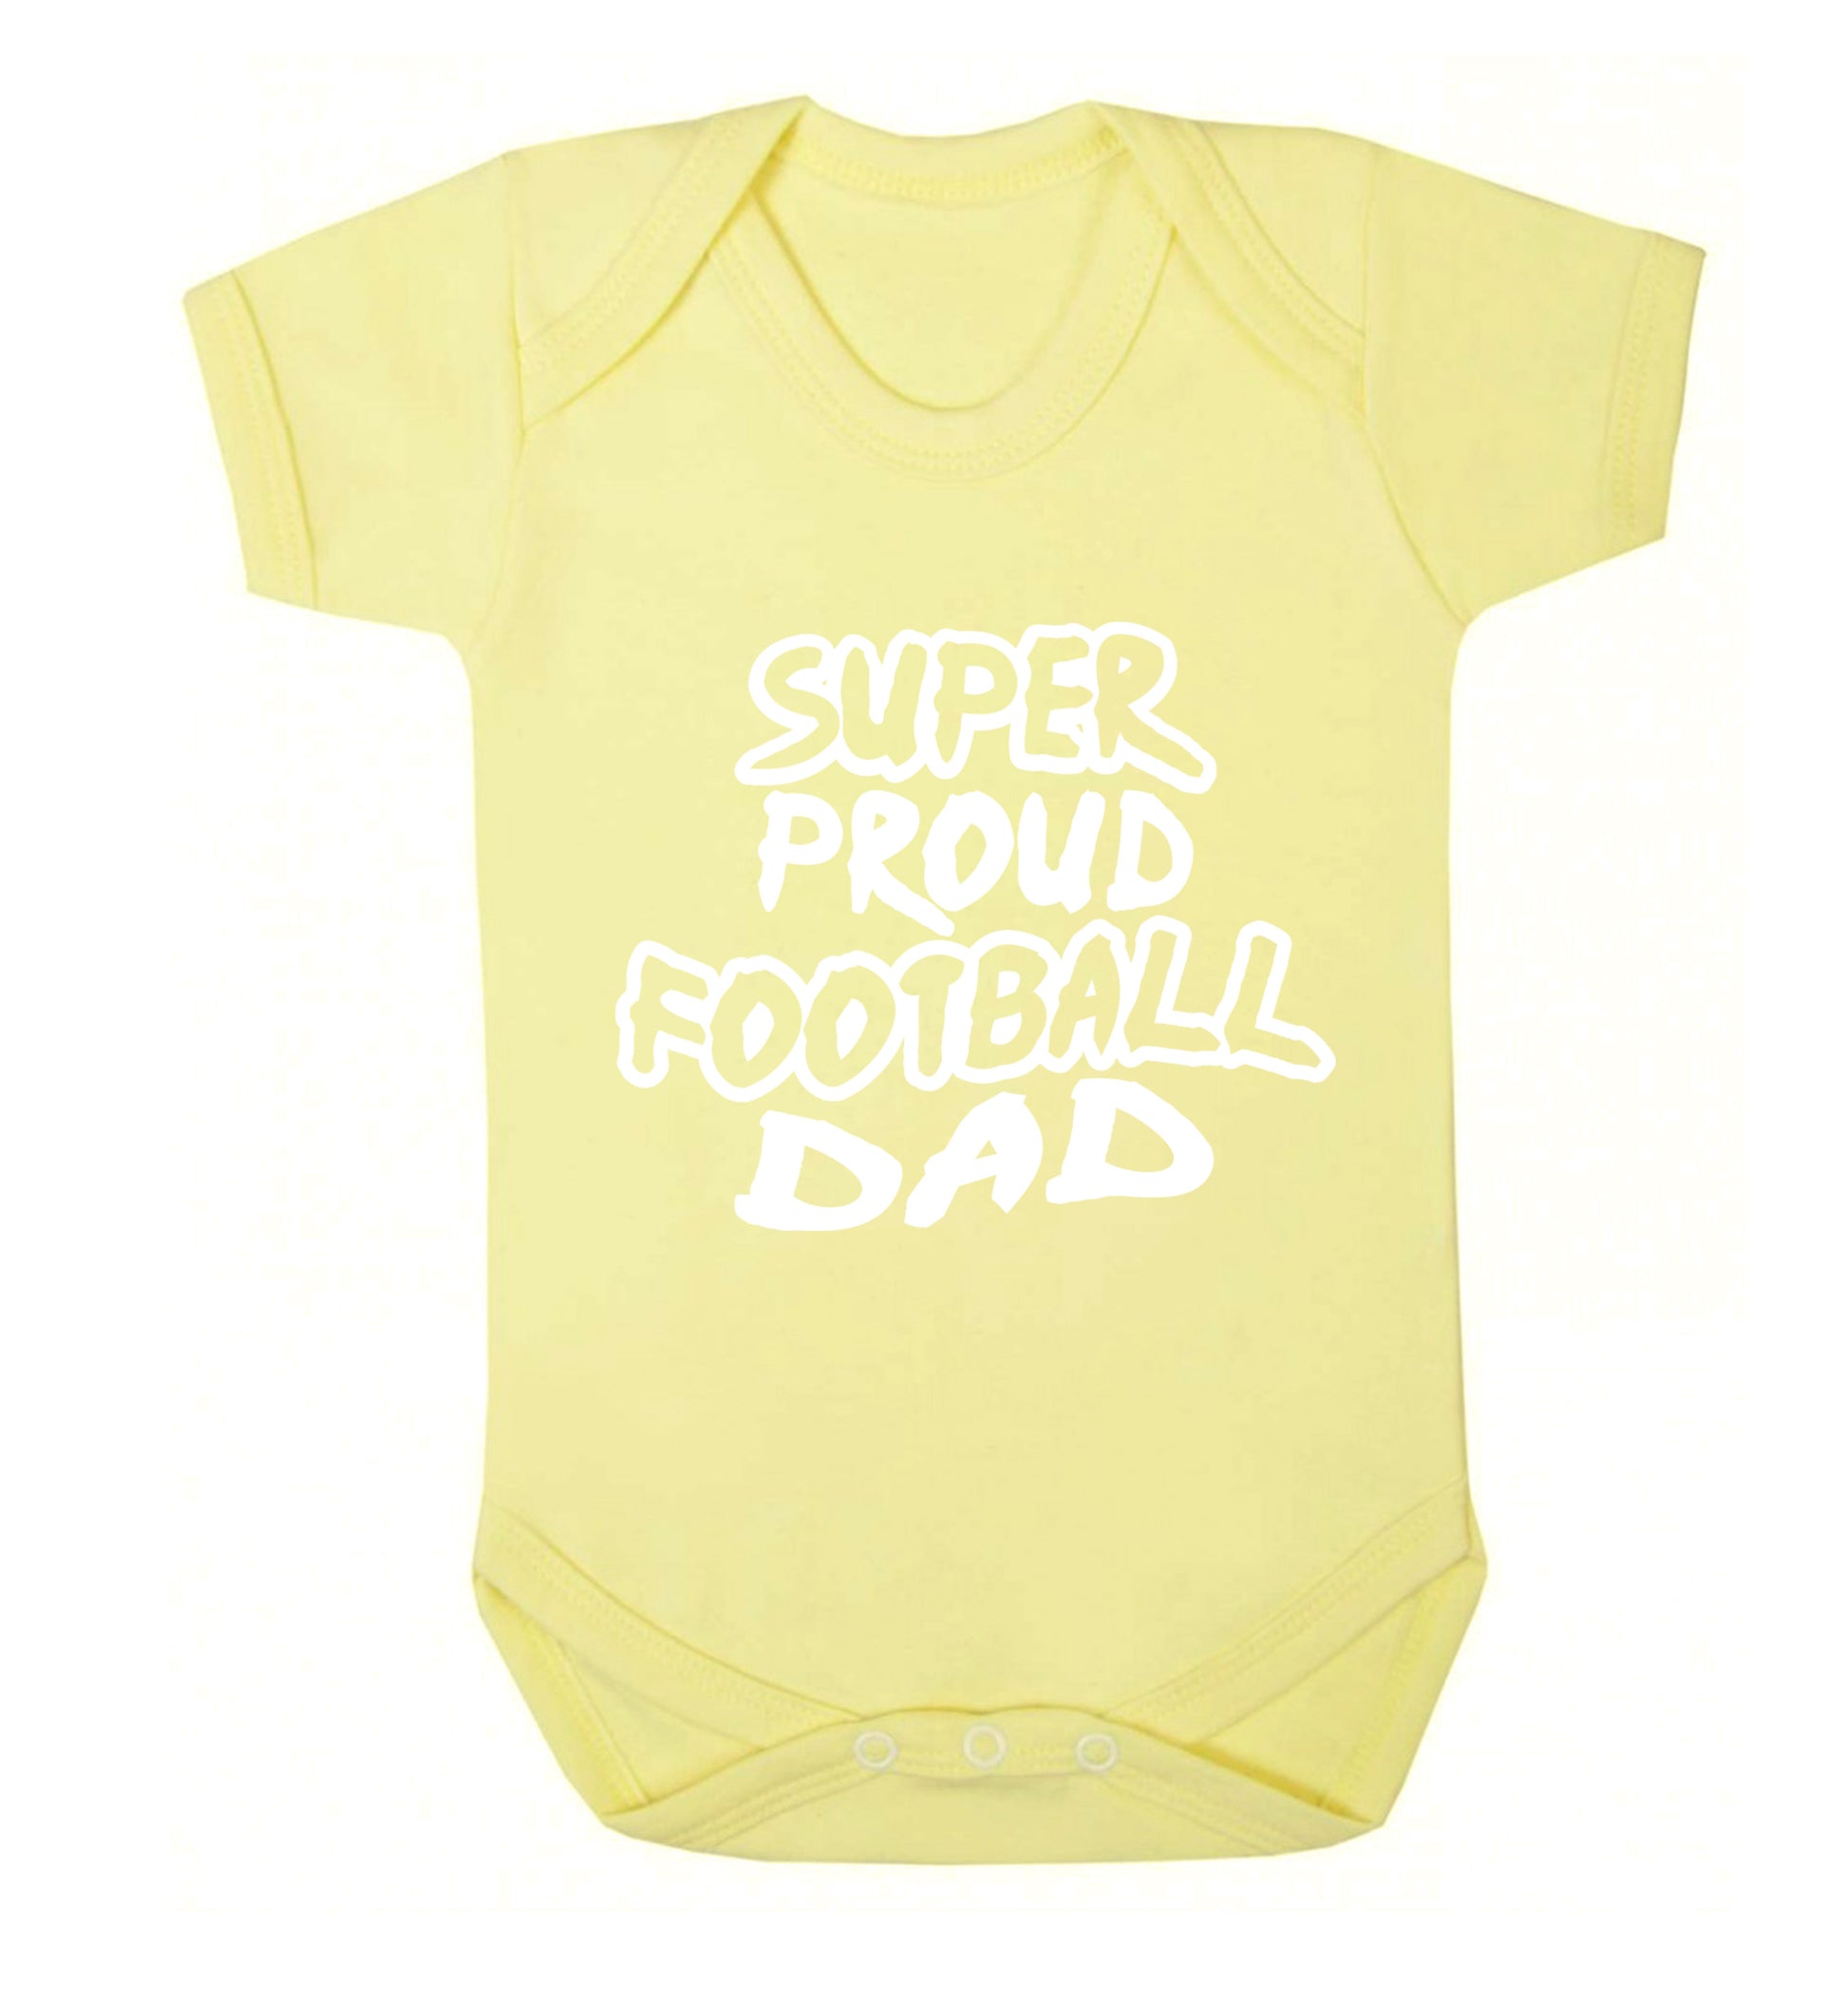 Super proud football dad Baby Vest pale yellow 18-24 months